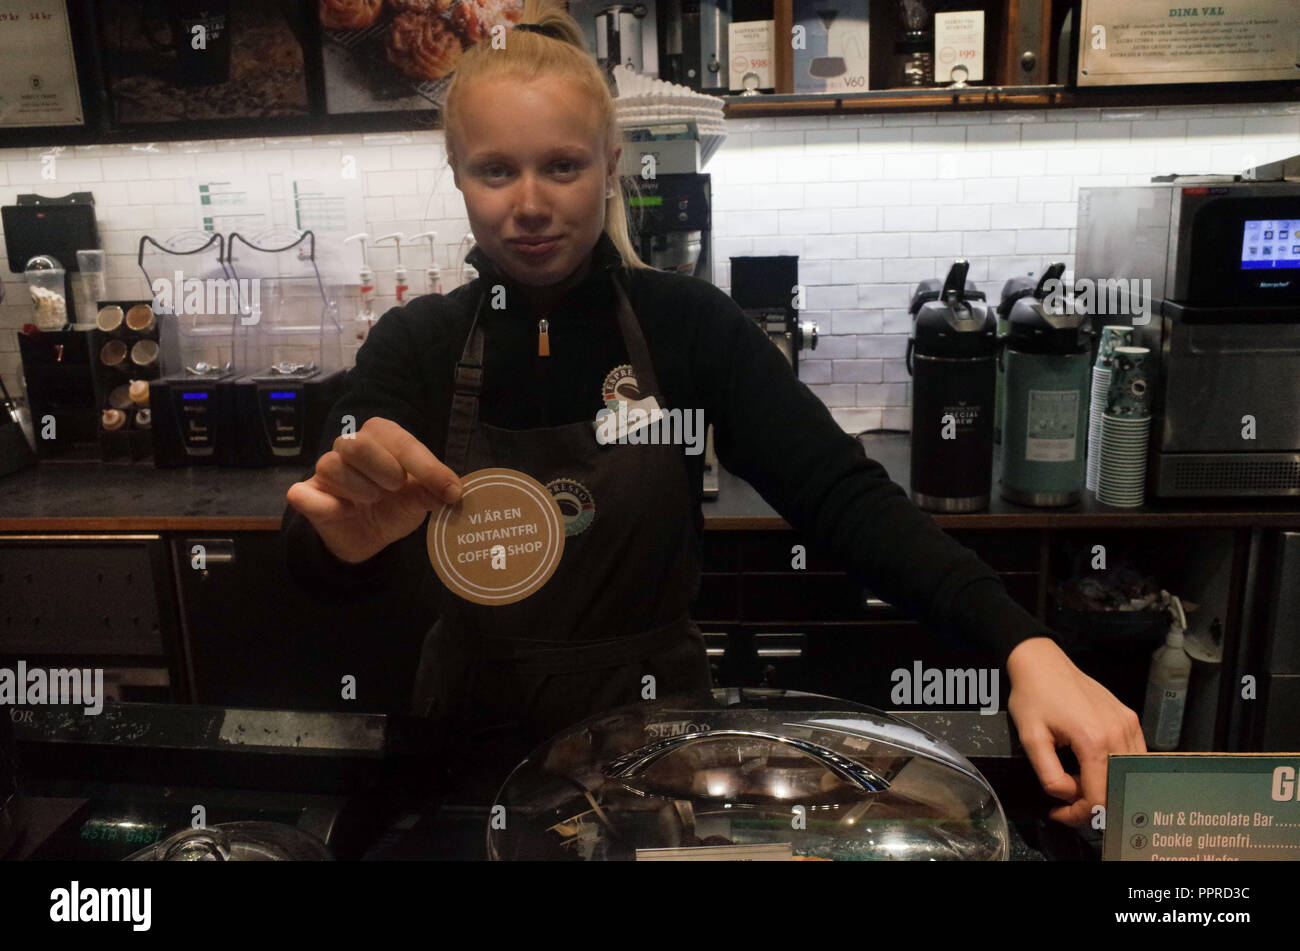 September 26, 2018 - Stockholm, Sweden: An employee of Expresso House shows a sign in Swedish language that means 'We Are a Cashless Coffee shop'. Sweden is the most cashless society on the planet, with 80% of all transactions in made with bank cards or mobile phone apps. *** FRANCE OUT / NO SALES TO FRENCH MEDIA *** Stock Photo